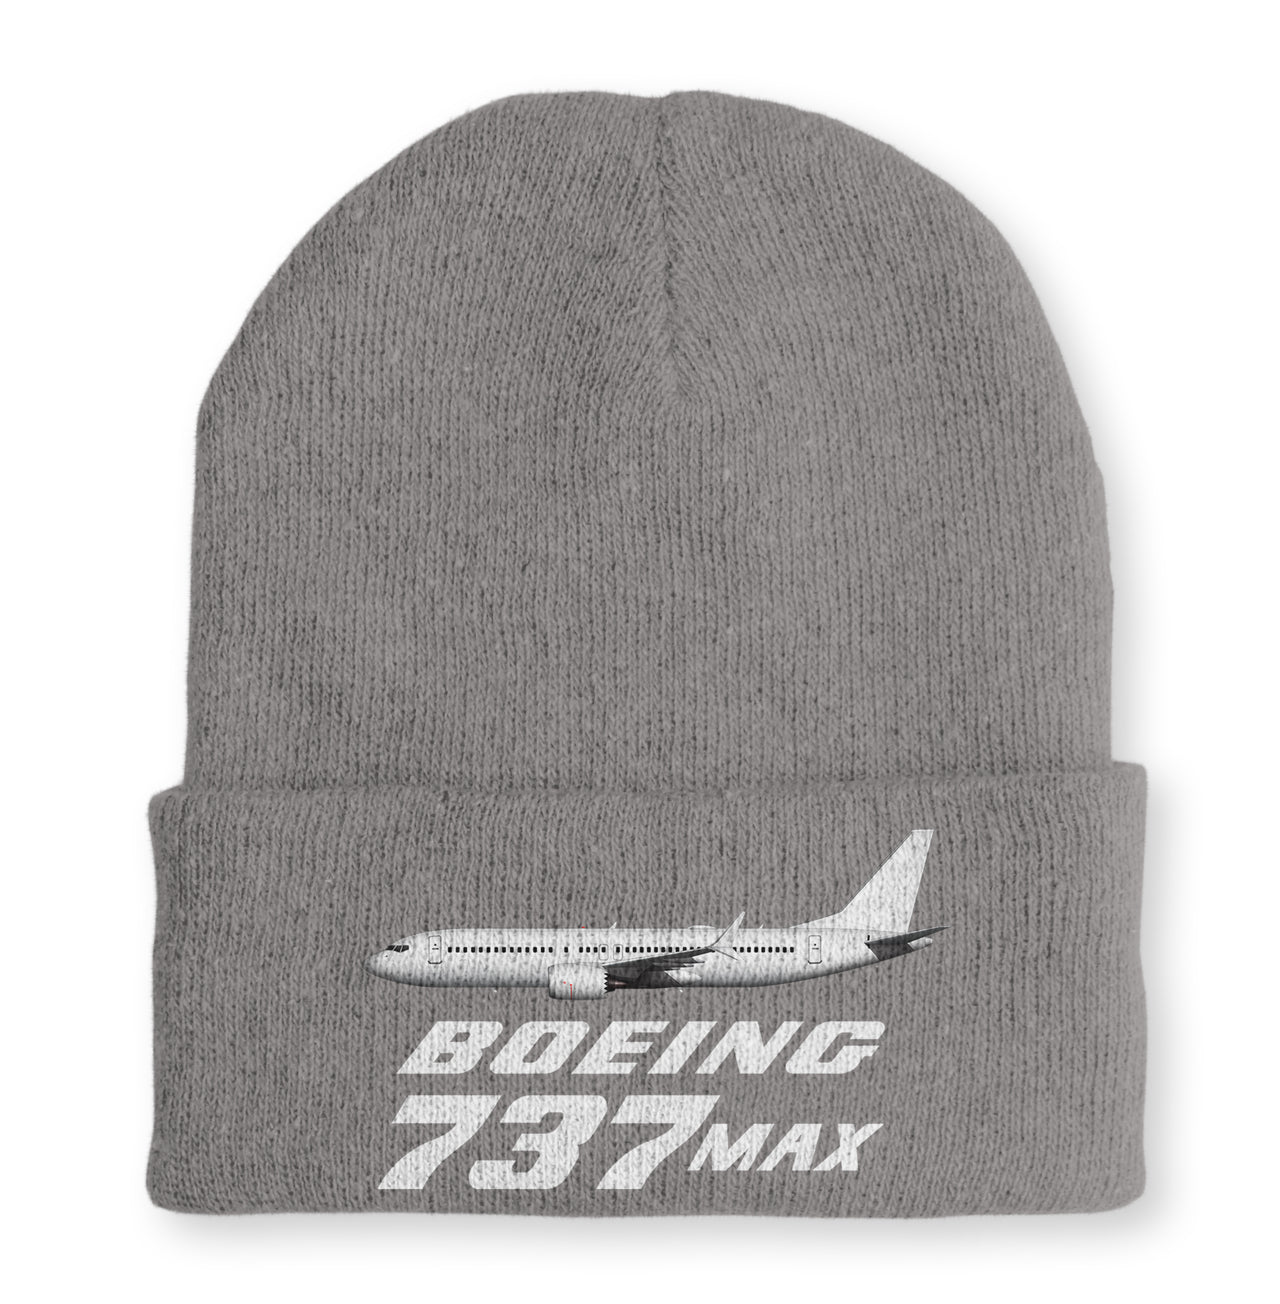 The Boeing 737Max Embroidered Beanies